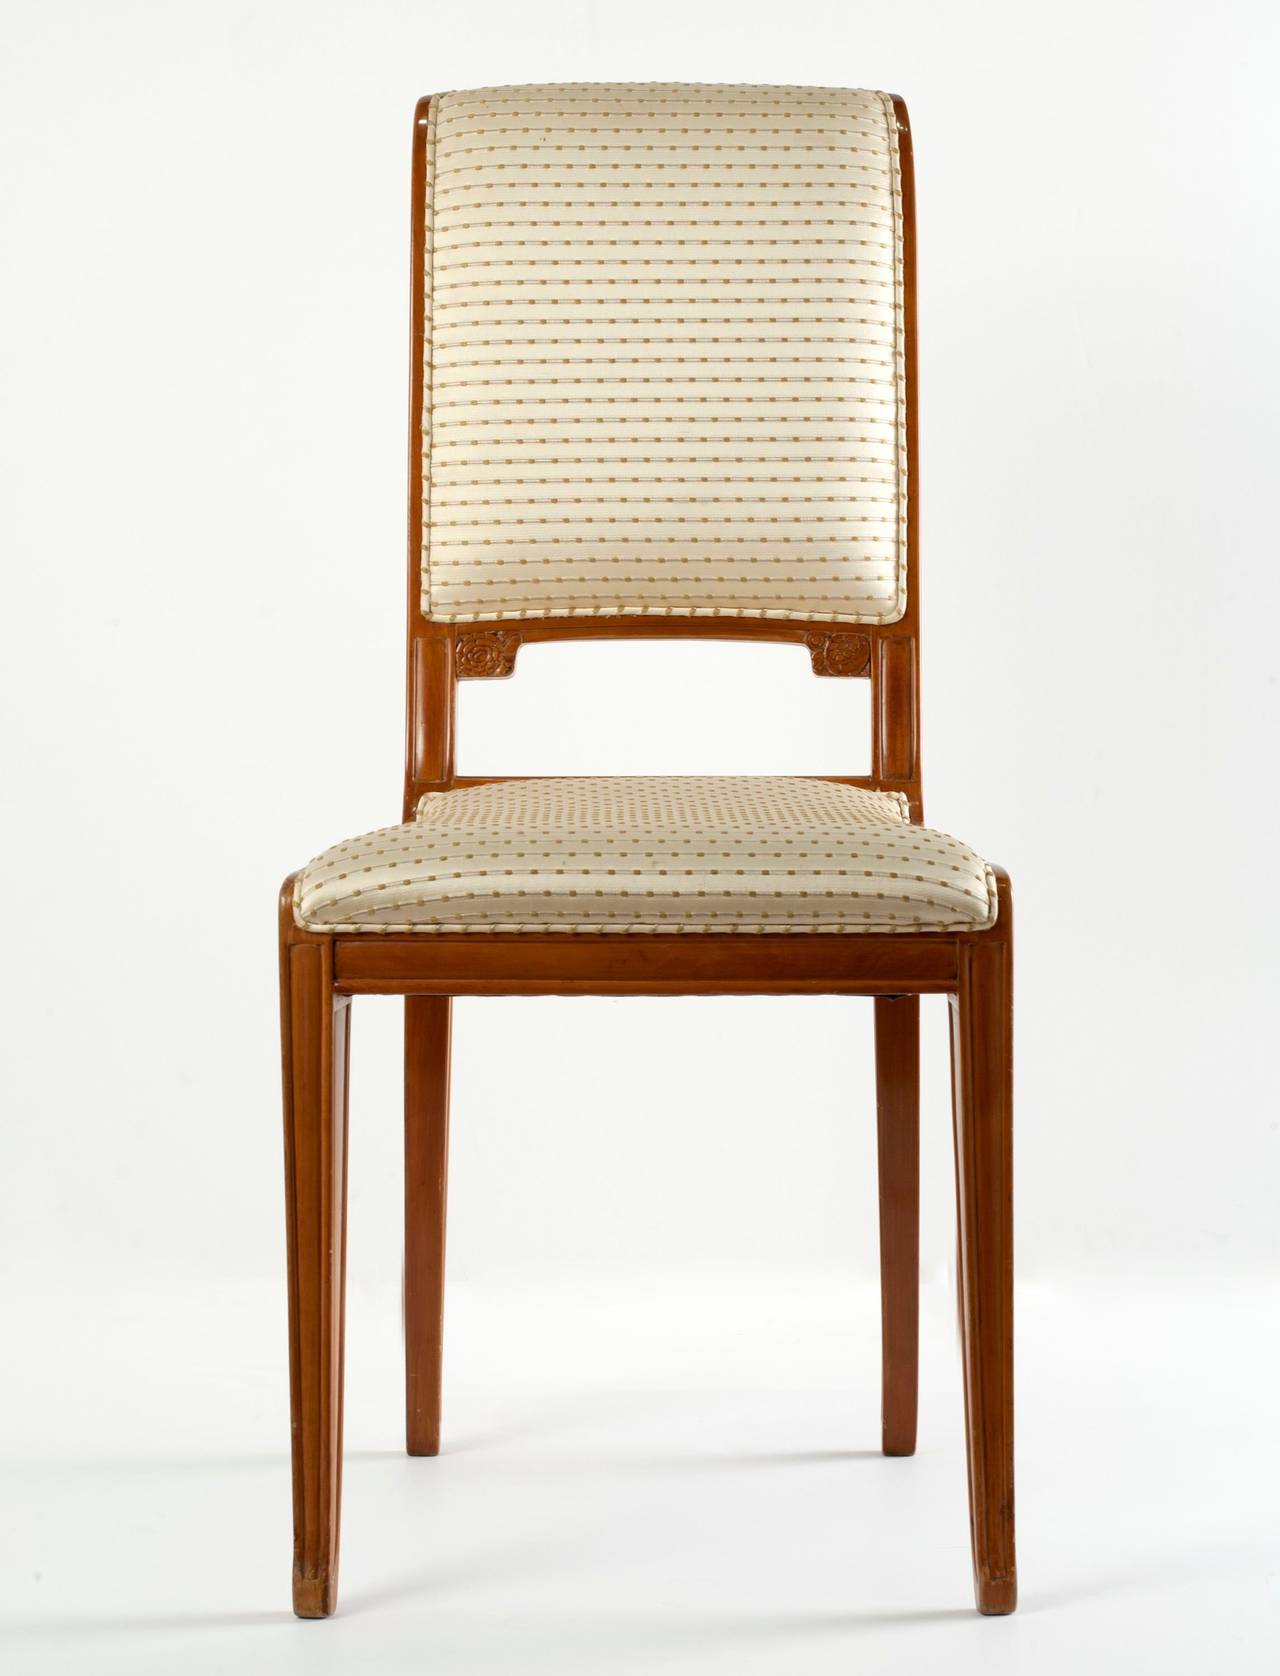 Carved fruitwood Art Deco side chair by Léon Jallot.

Provenance: This set of furniture, comprised of a pair of armchairs, a pair of side chairs, and a matching coffee table, was purchased directly by Madame Yvonne Zunz from Léon Jallot in